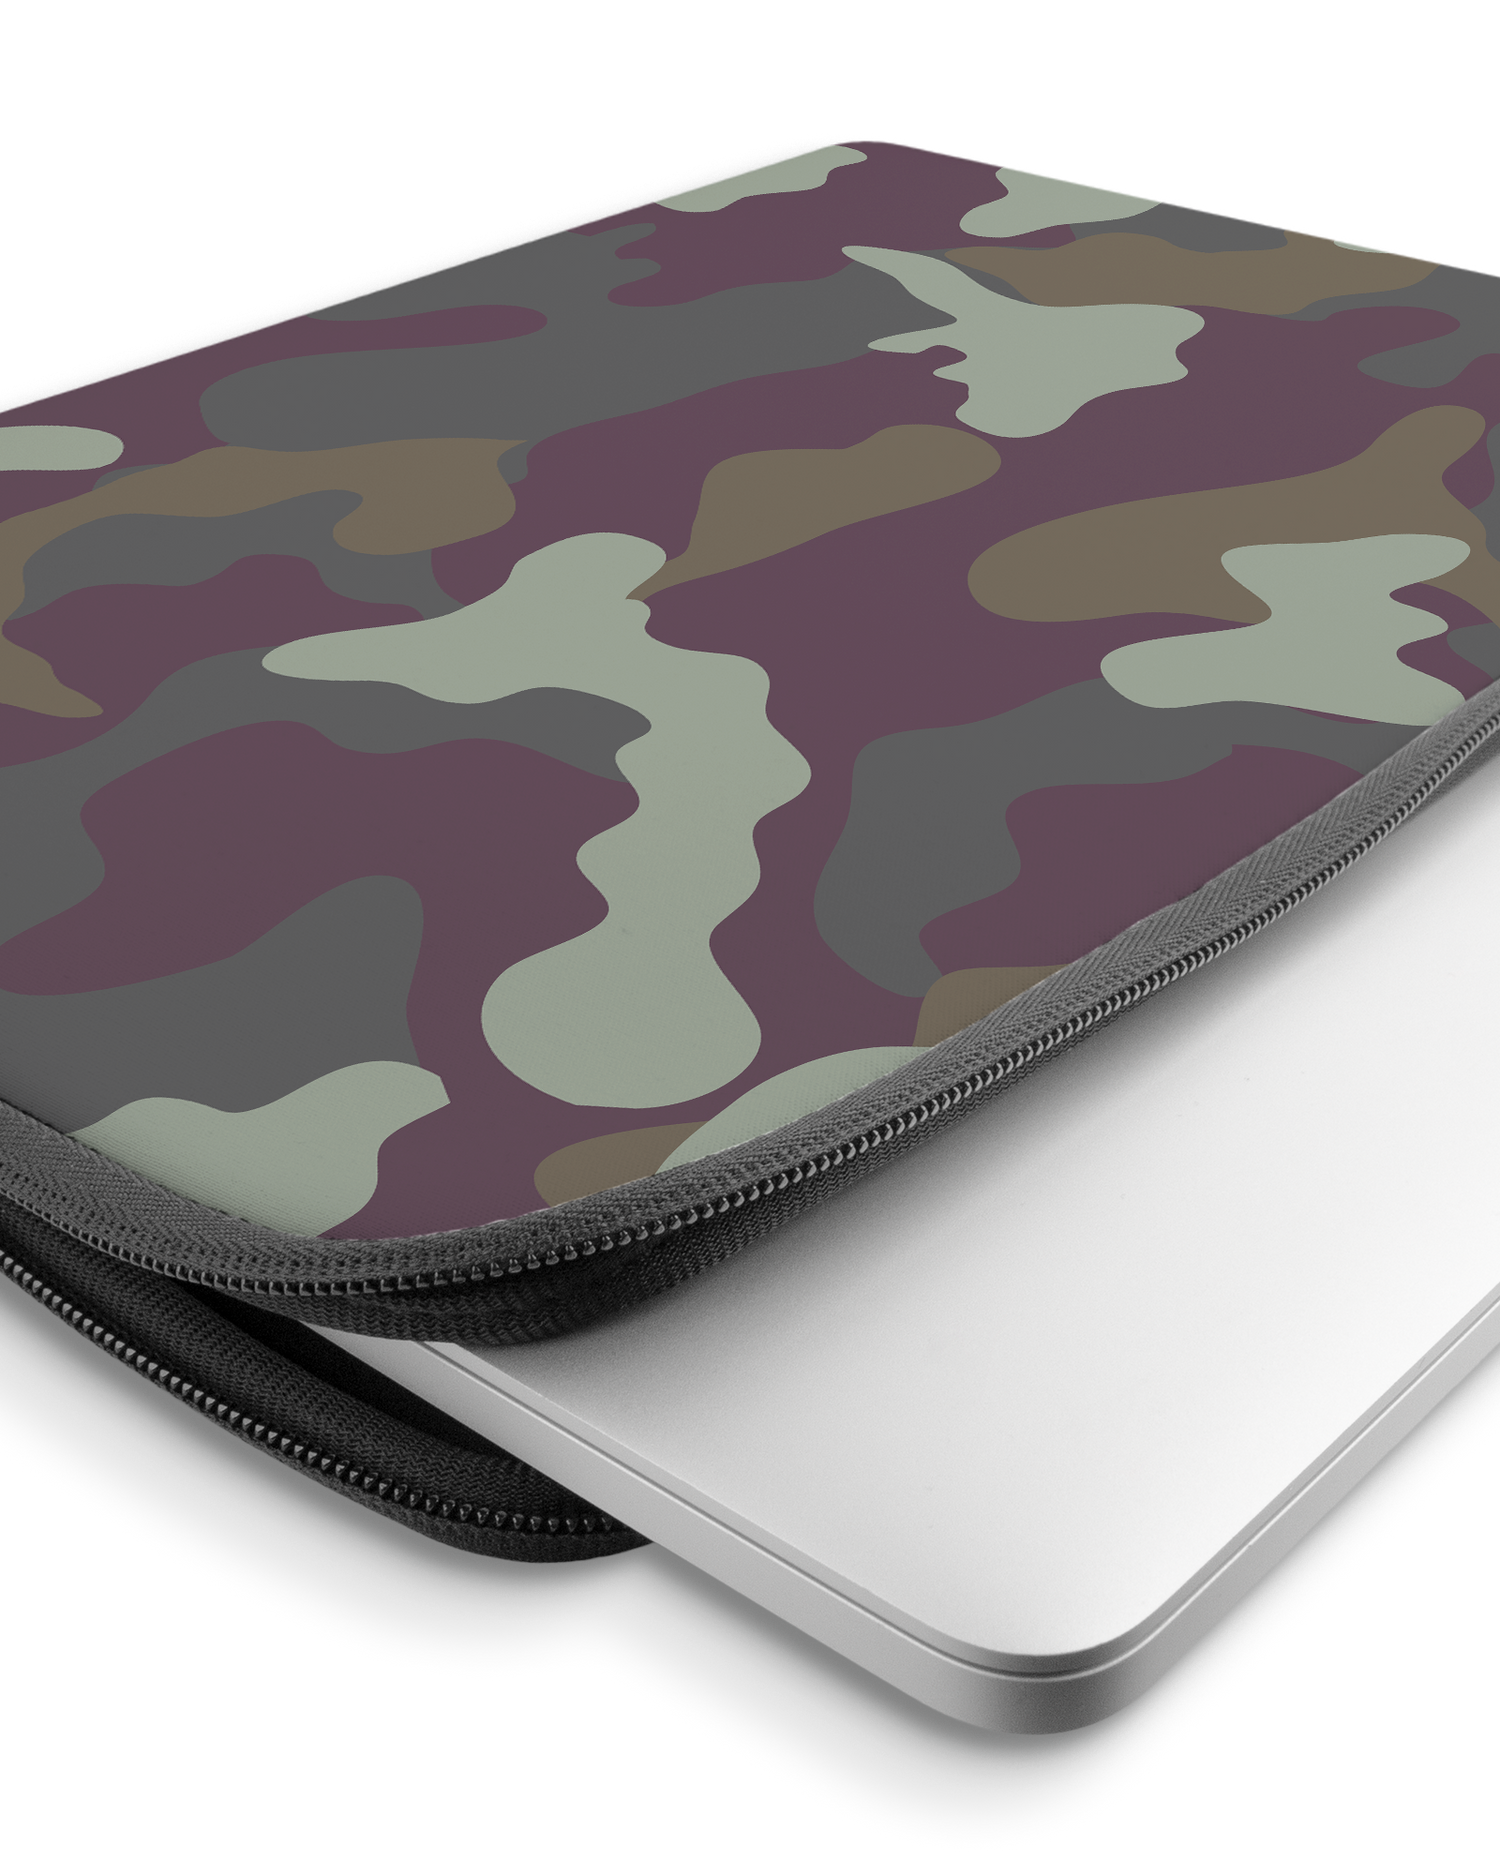 Night Camo Laptop Case 15-16 inch with device inside